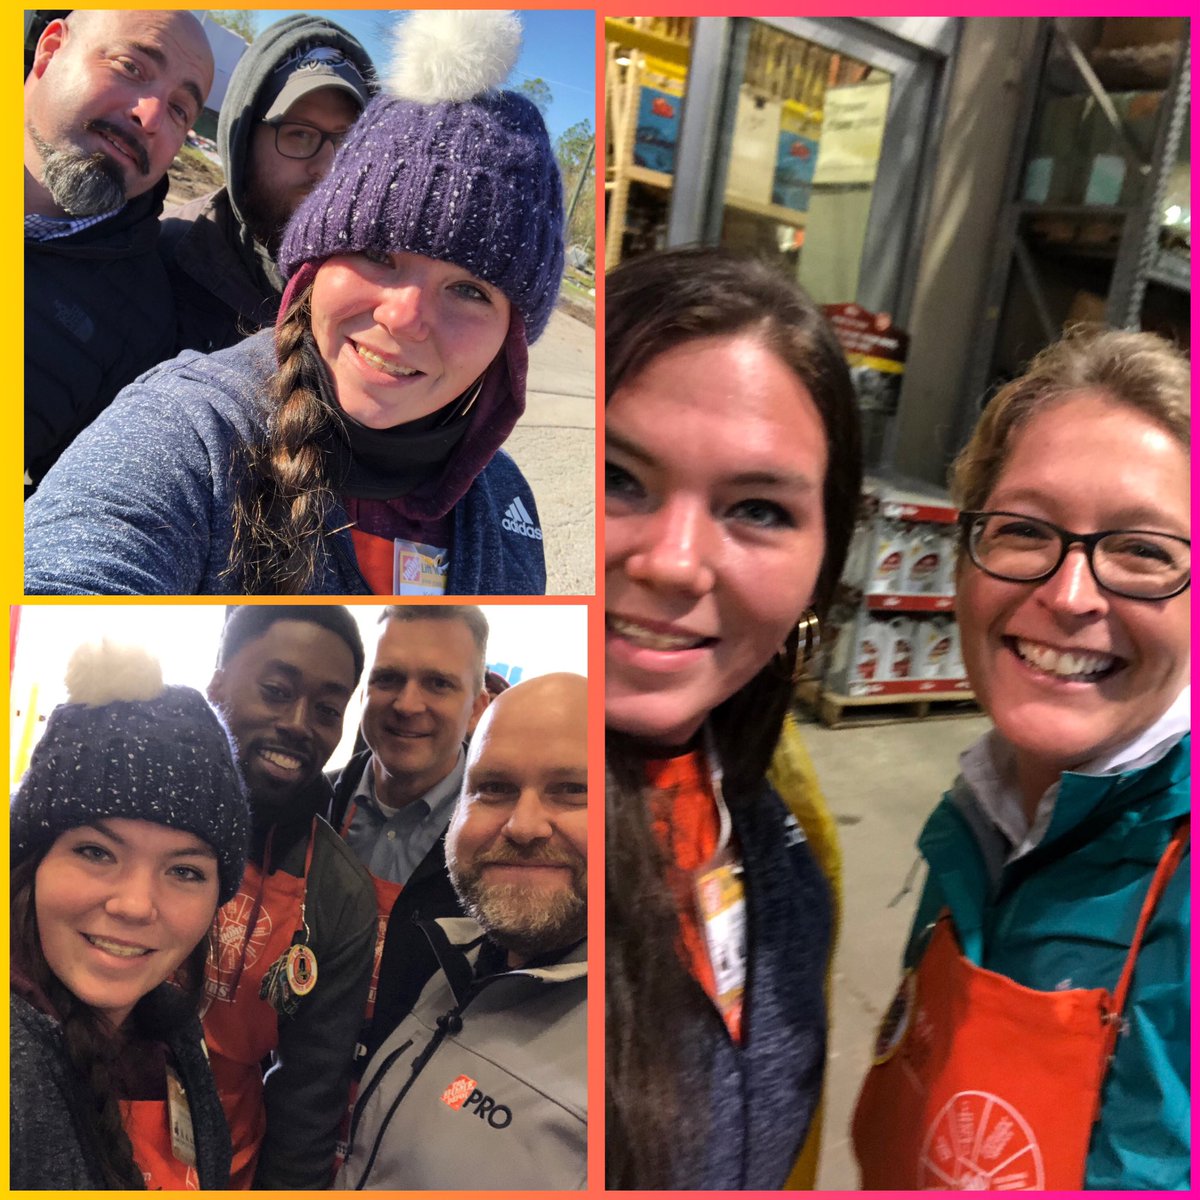 It’s the last day of #DisasterRelief  from #HurricaneMichael and it’s bittersweet. Got some time with a lot of really awesome people that one day I hope to be on their level. #homedepotstrong @WeidmanJess @AyazGhany @KelliTawney @LucSCTOM @MikeBII_THD @AndrewLBennett1